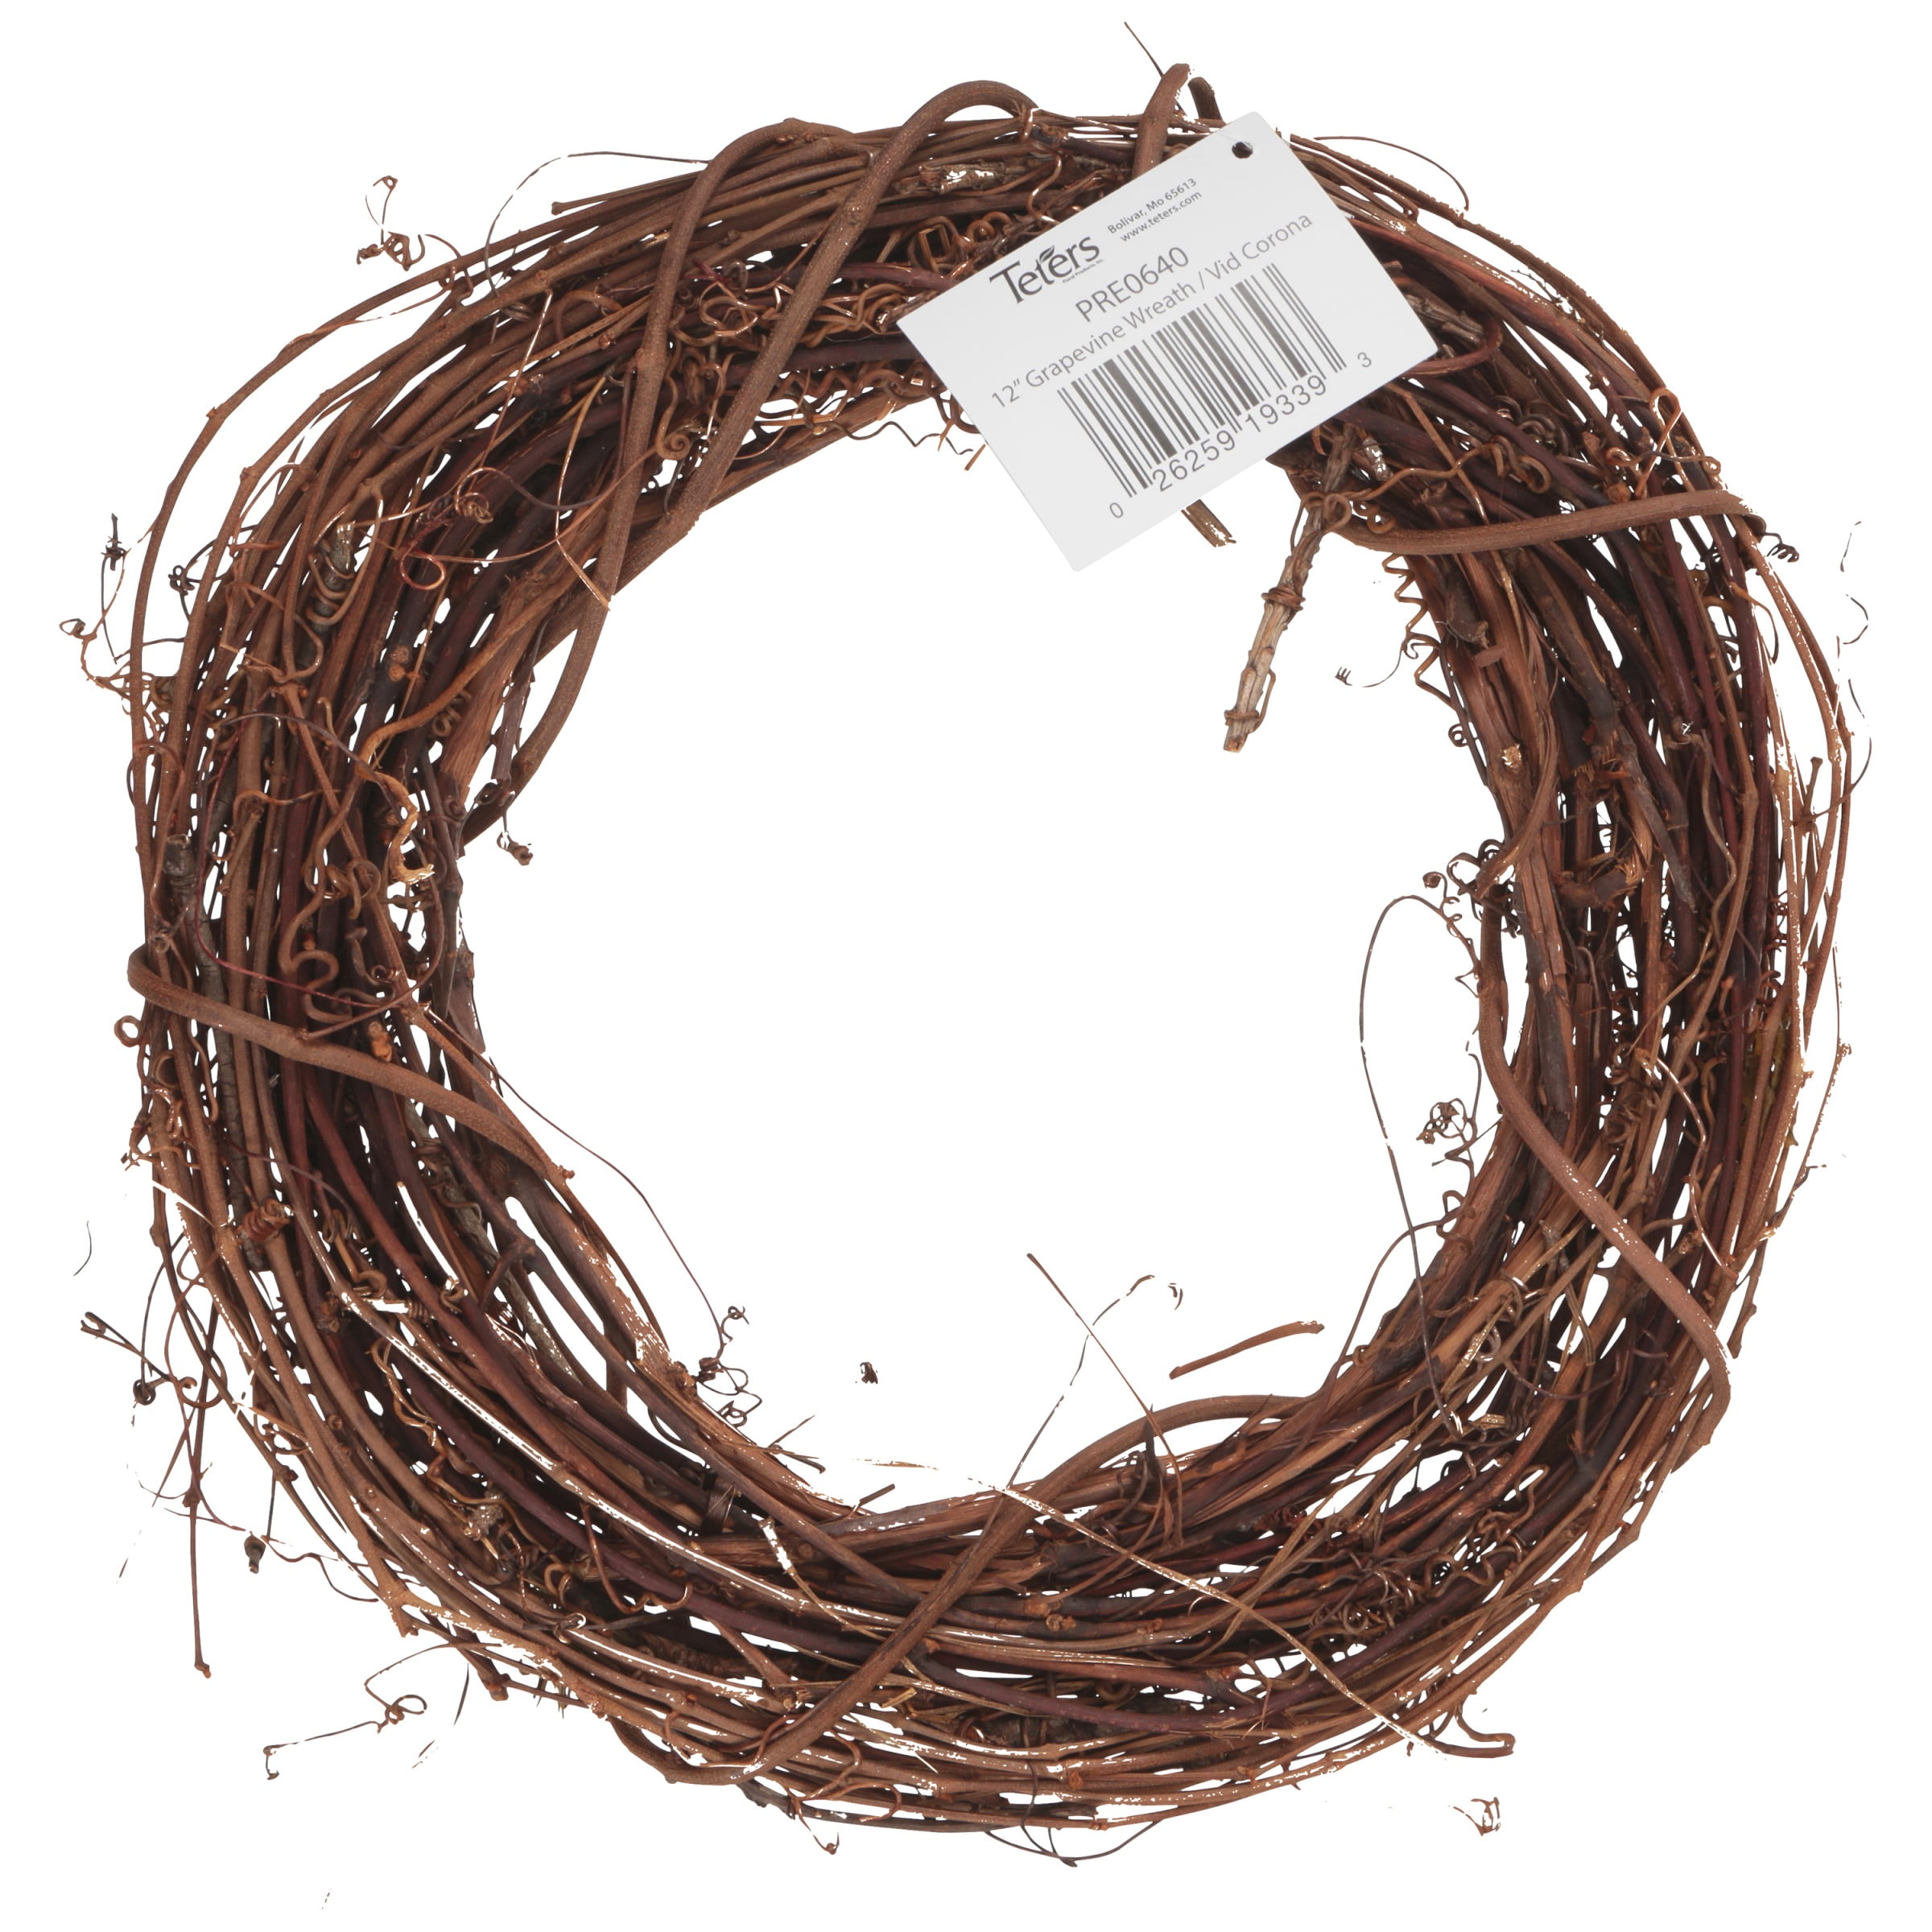 PEPPERLONELY 1 PC Natural Grapevine Wreath 12 Inch 